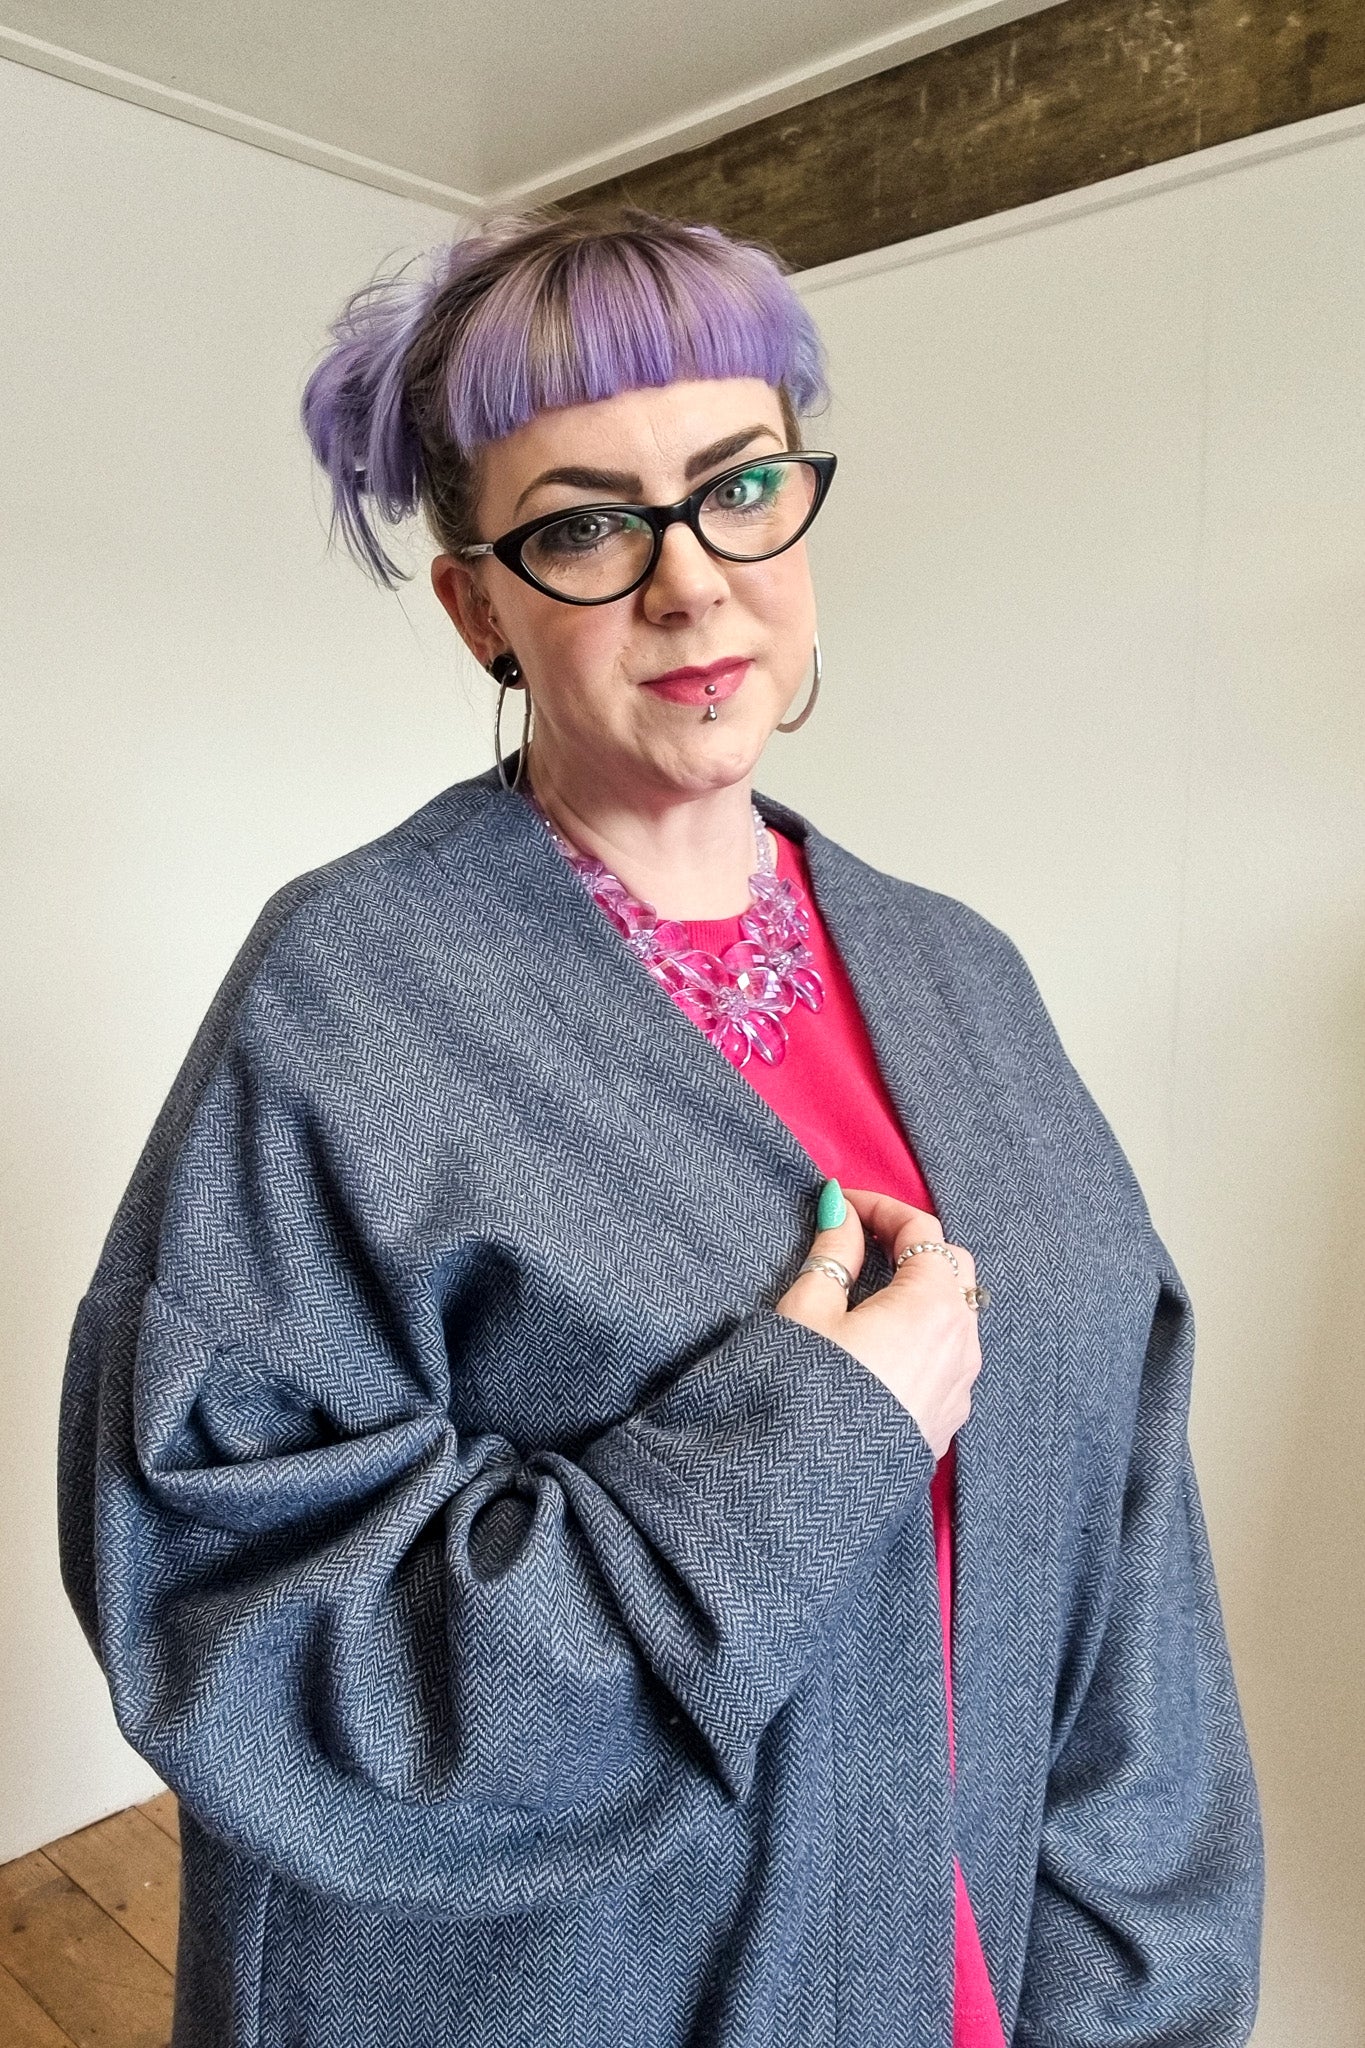 Lindsey the company owner wears the blue herringbone wool cardigan, with large patch pockets, front view up close